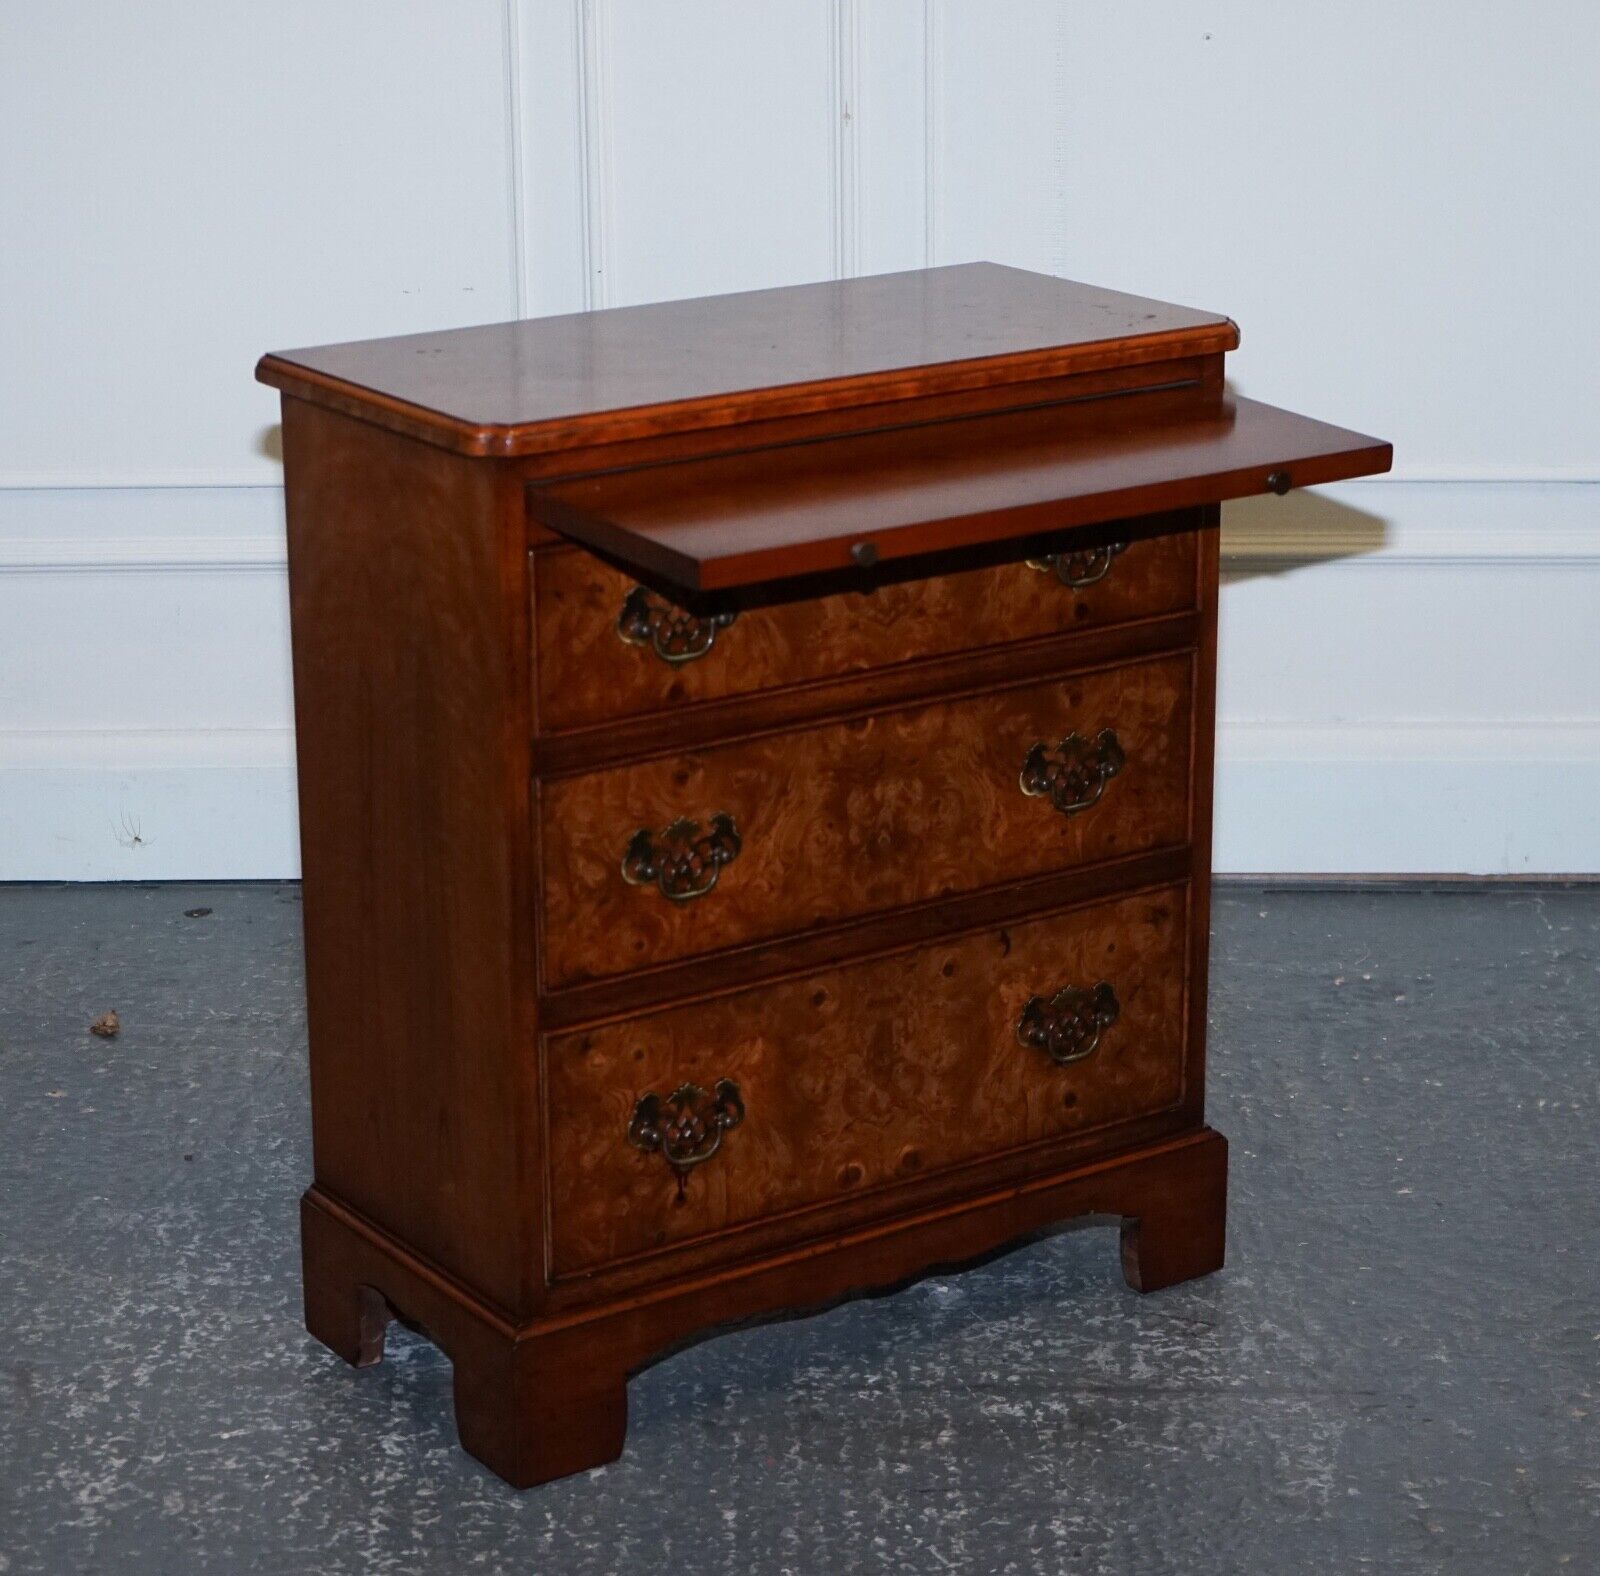 LOVELY VINTAGE BURR WALNUT BACHERLORS CHEST OF DRAWERS WITH A BUTLER SLIDE